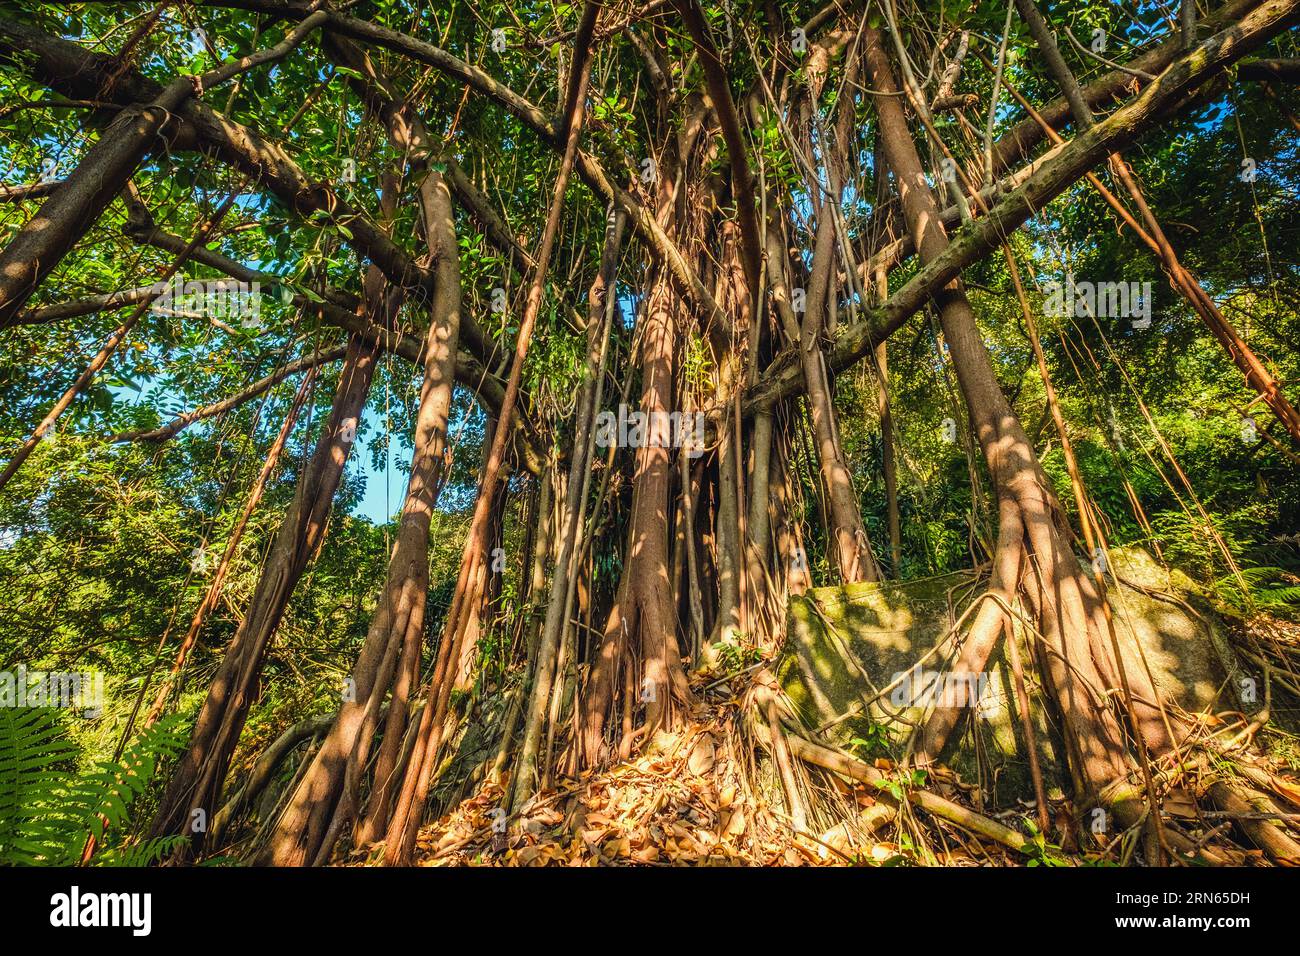 big ficus tree in jungle forest with air roots Stock Photo